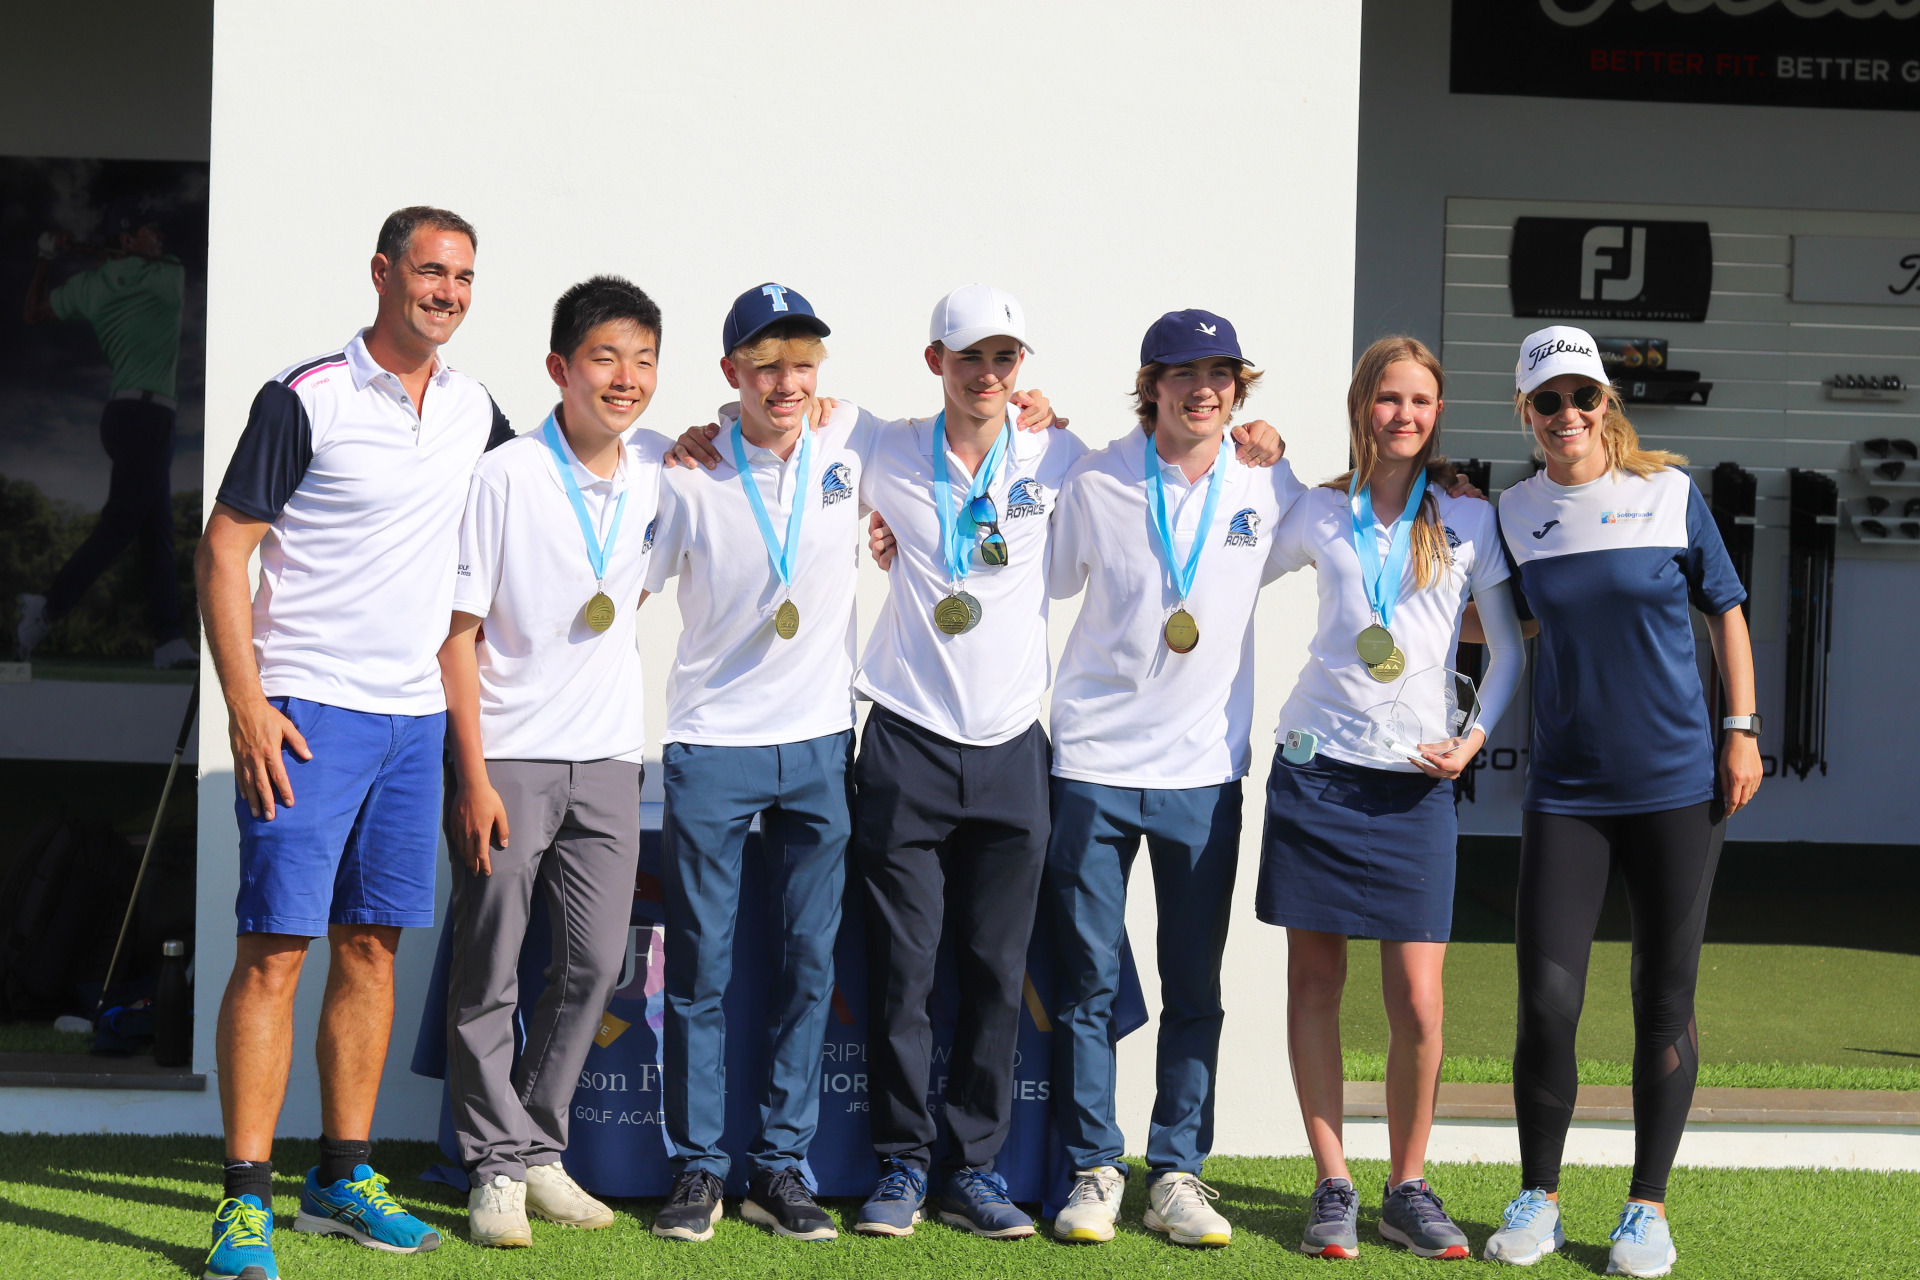 TASIS students won first place in the teams category of the ISAA Golf Championship.